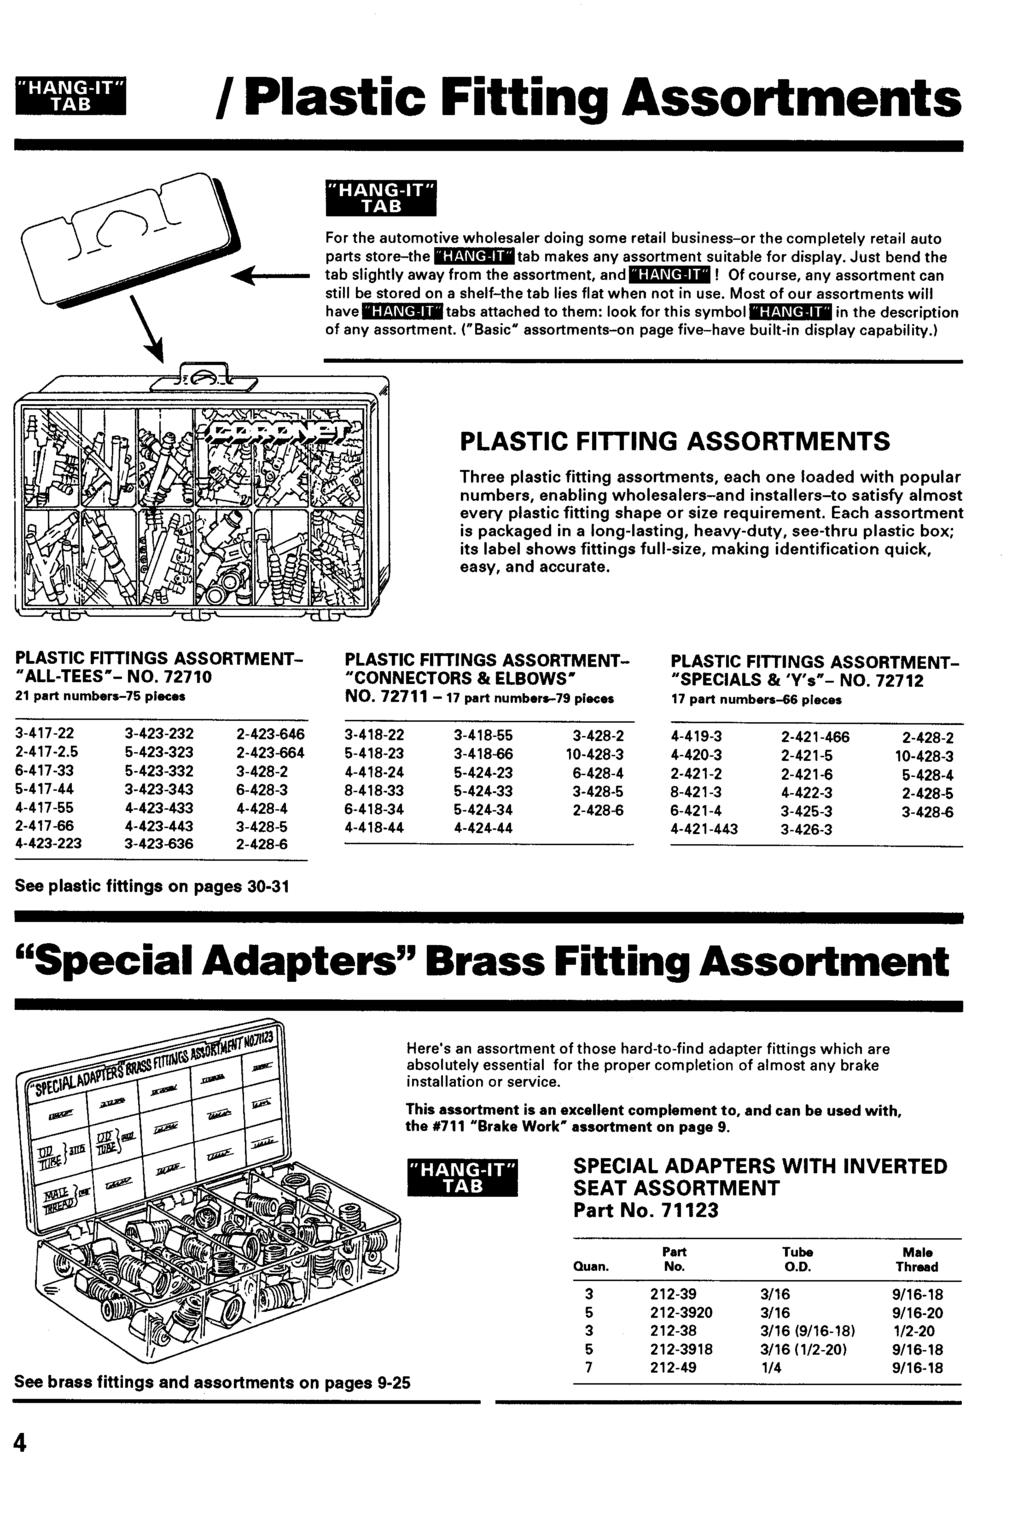 "HANG-IT" TAB / Plastic Fitting Assortments "HANG-IT" TAB For the automotive wholesaler doing some retail business-or the completely retail auto parts store-the tab makes any assortment suitable for